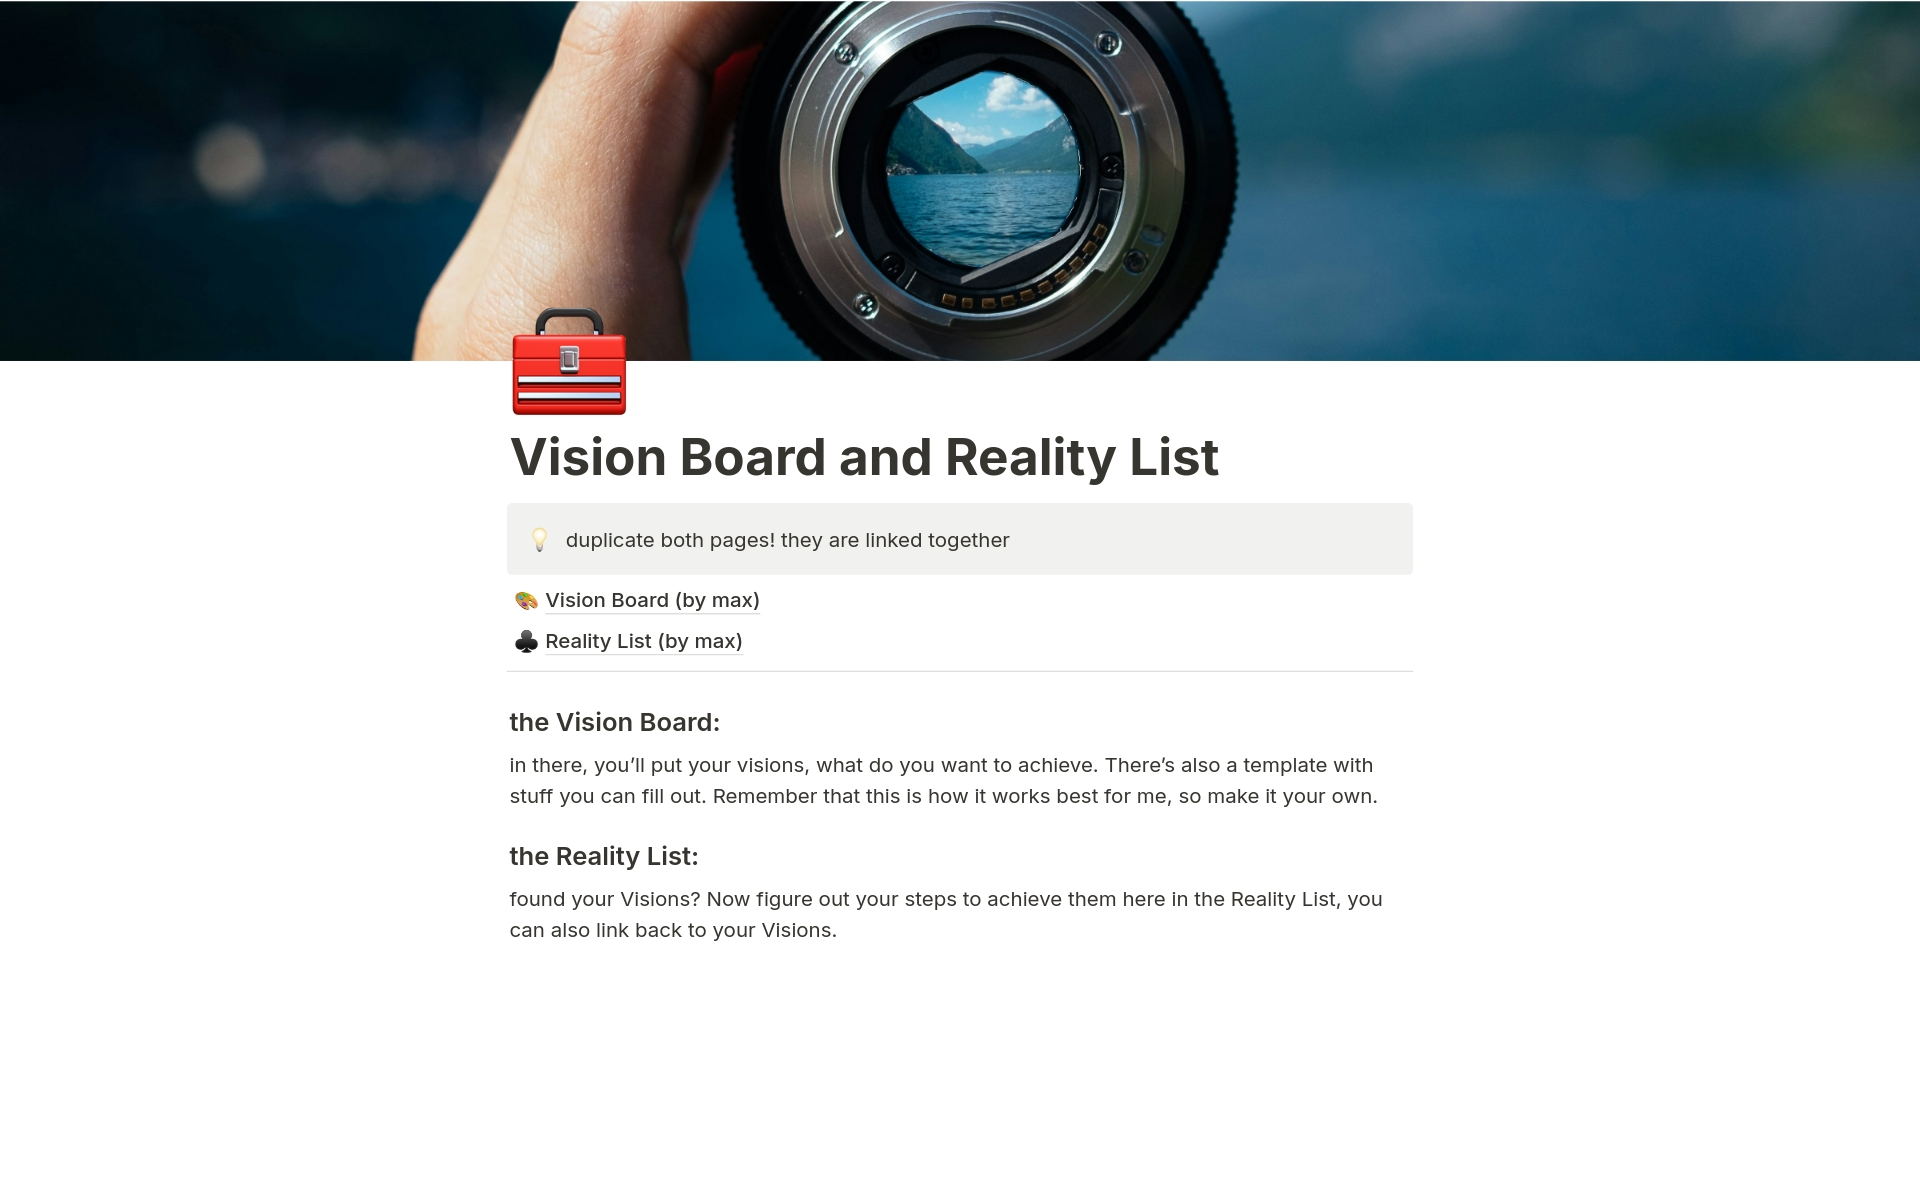 Vision Board with Reality List (by max)のテンプレートのプレビュー